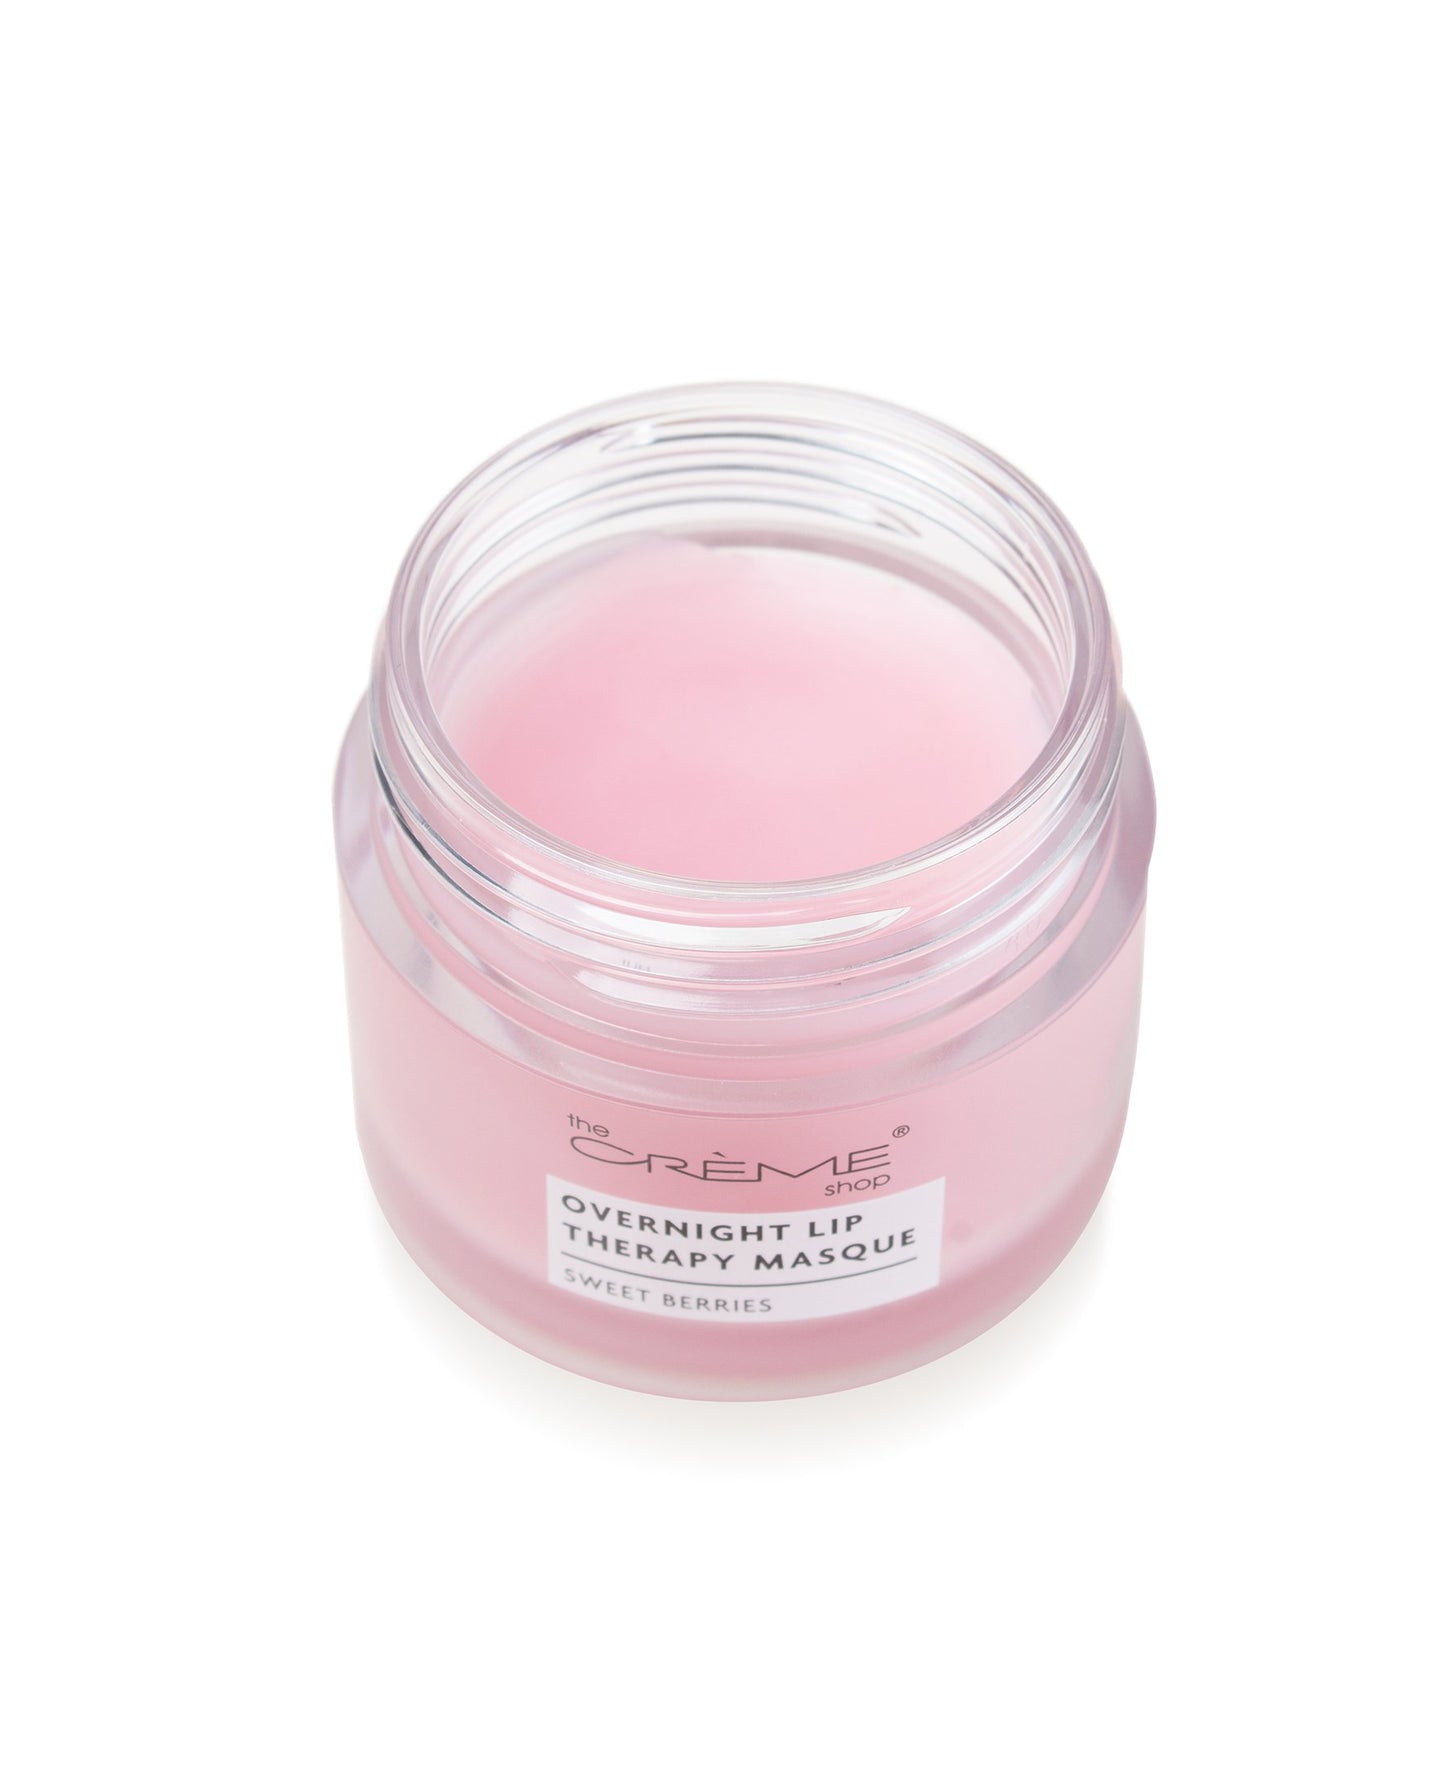 Overnight Lip Therapy Masque Sweet Berries - The Crème Shop